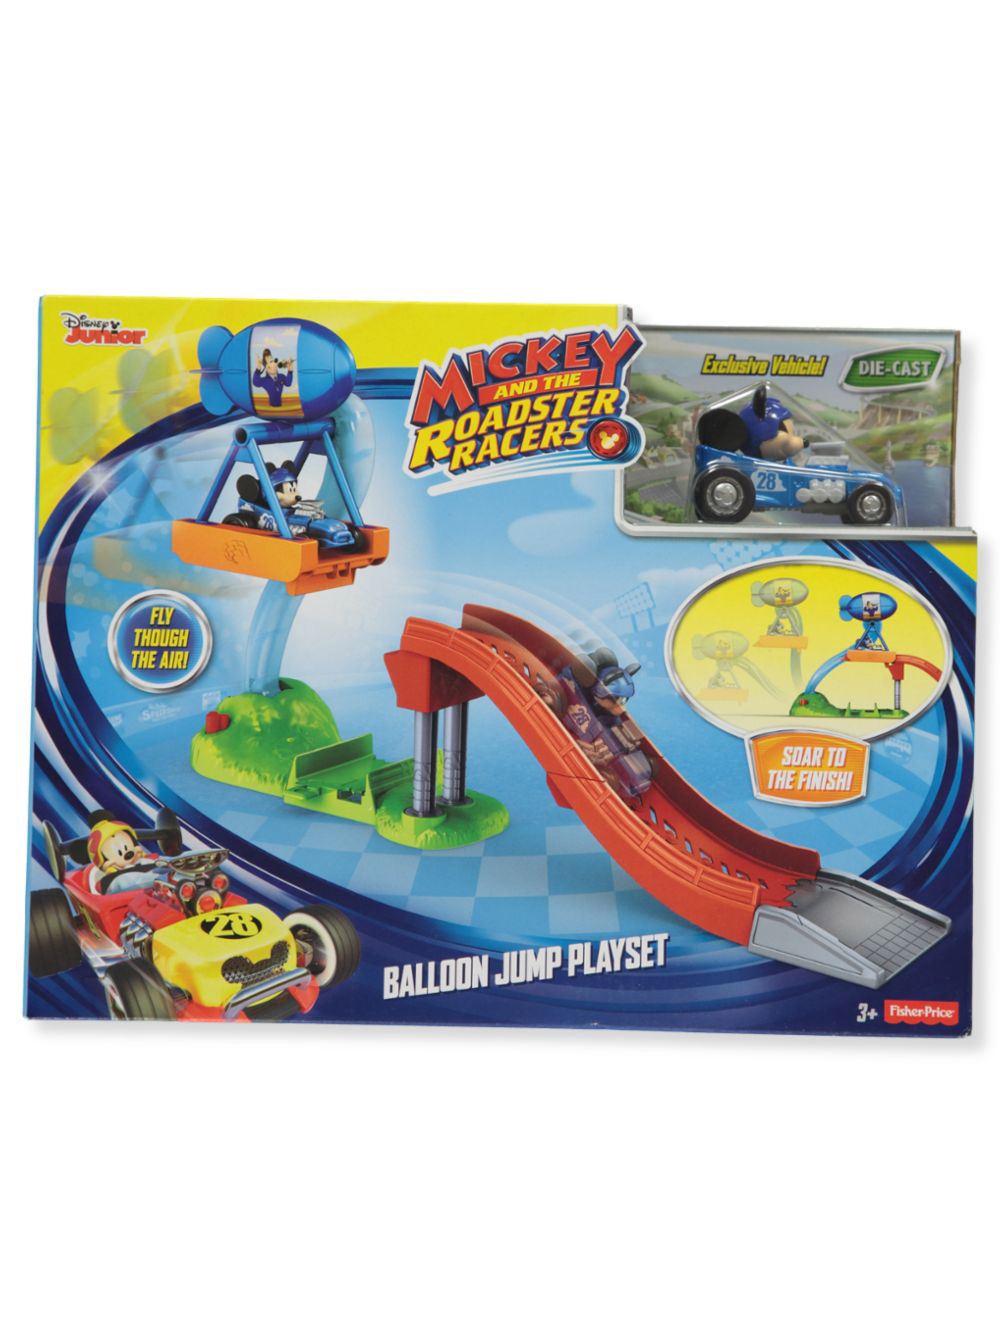 mickey roadster racers track